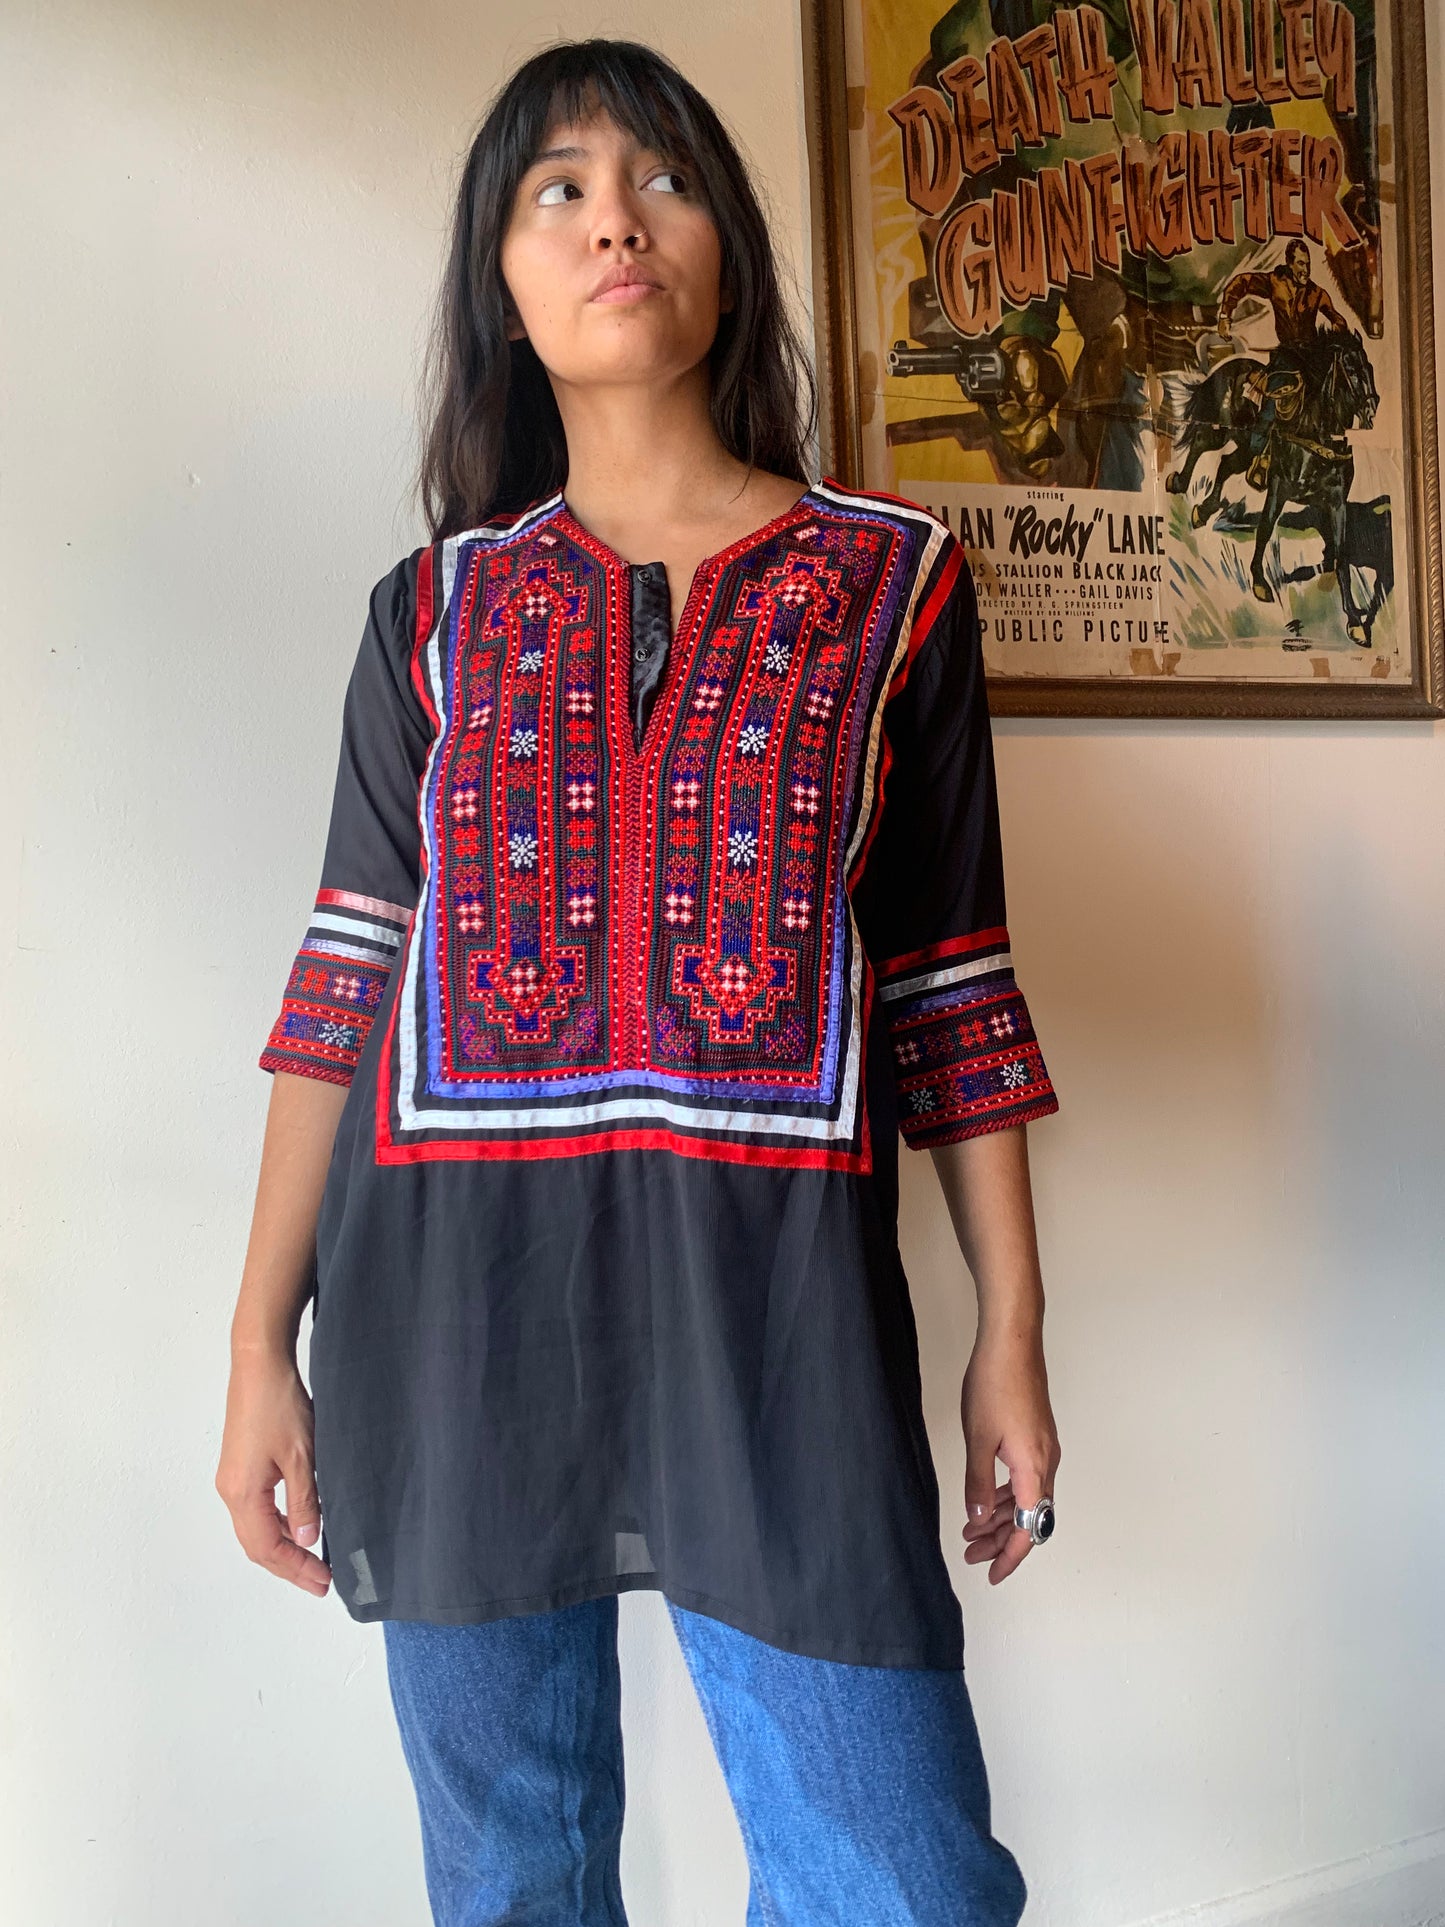 1960s Black Silk Embroidered Tunic Blouse (M)